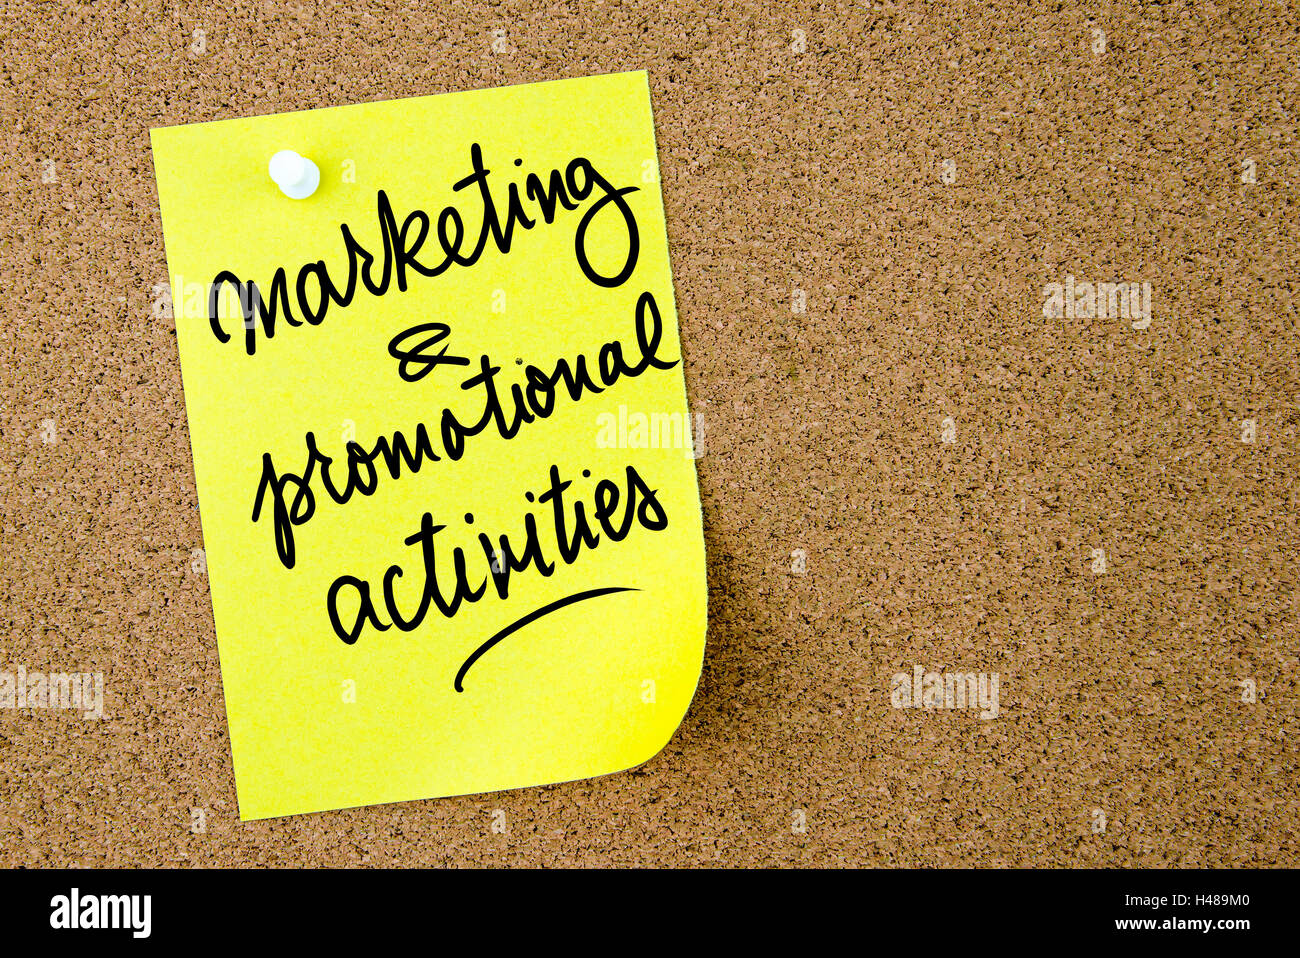 Marketing and Promotional Activities text written on yellow paper note pinned on cork board with white thumbtack. Stock Photo